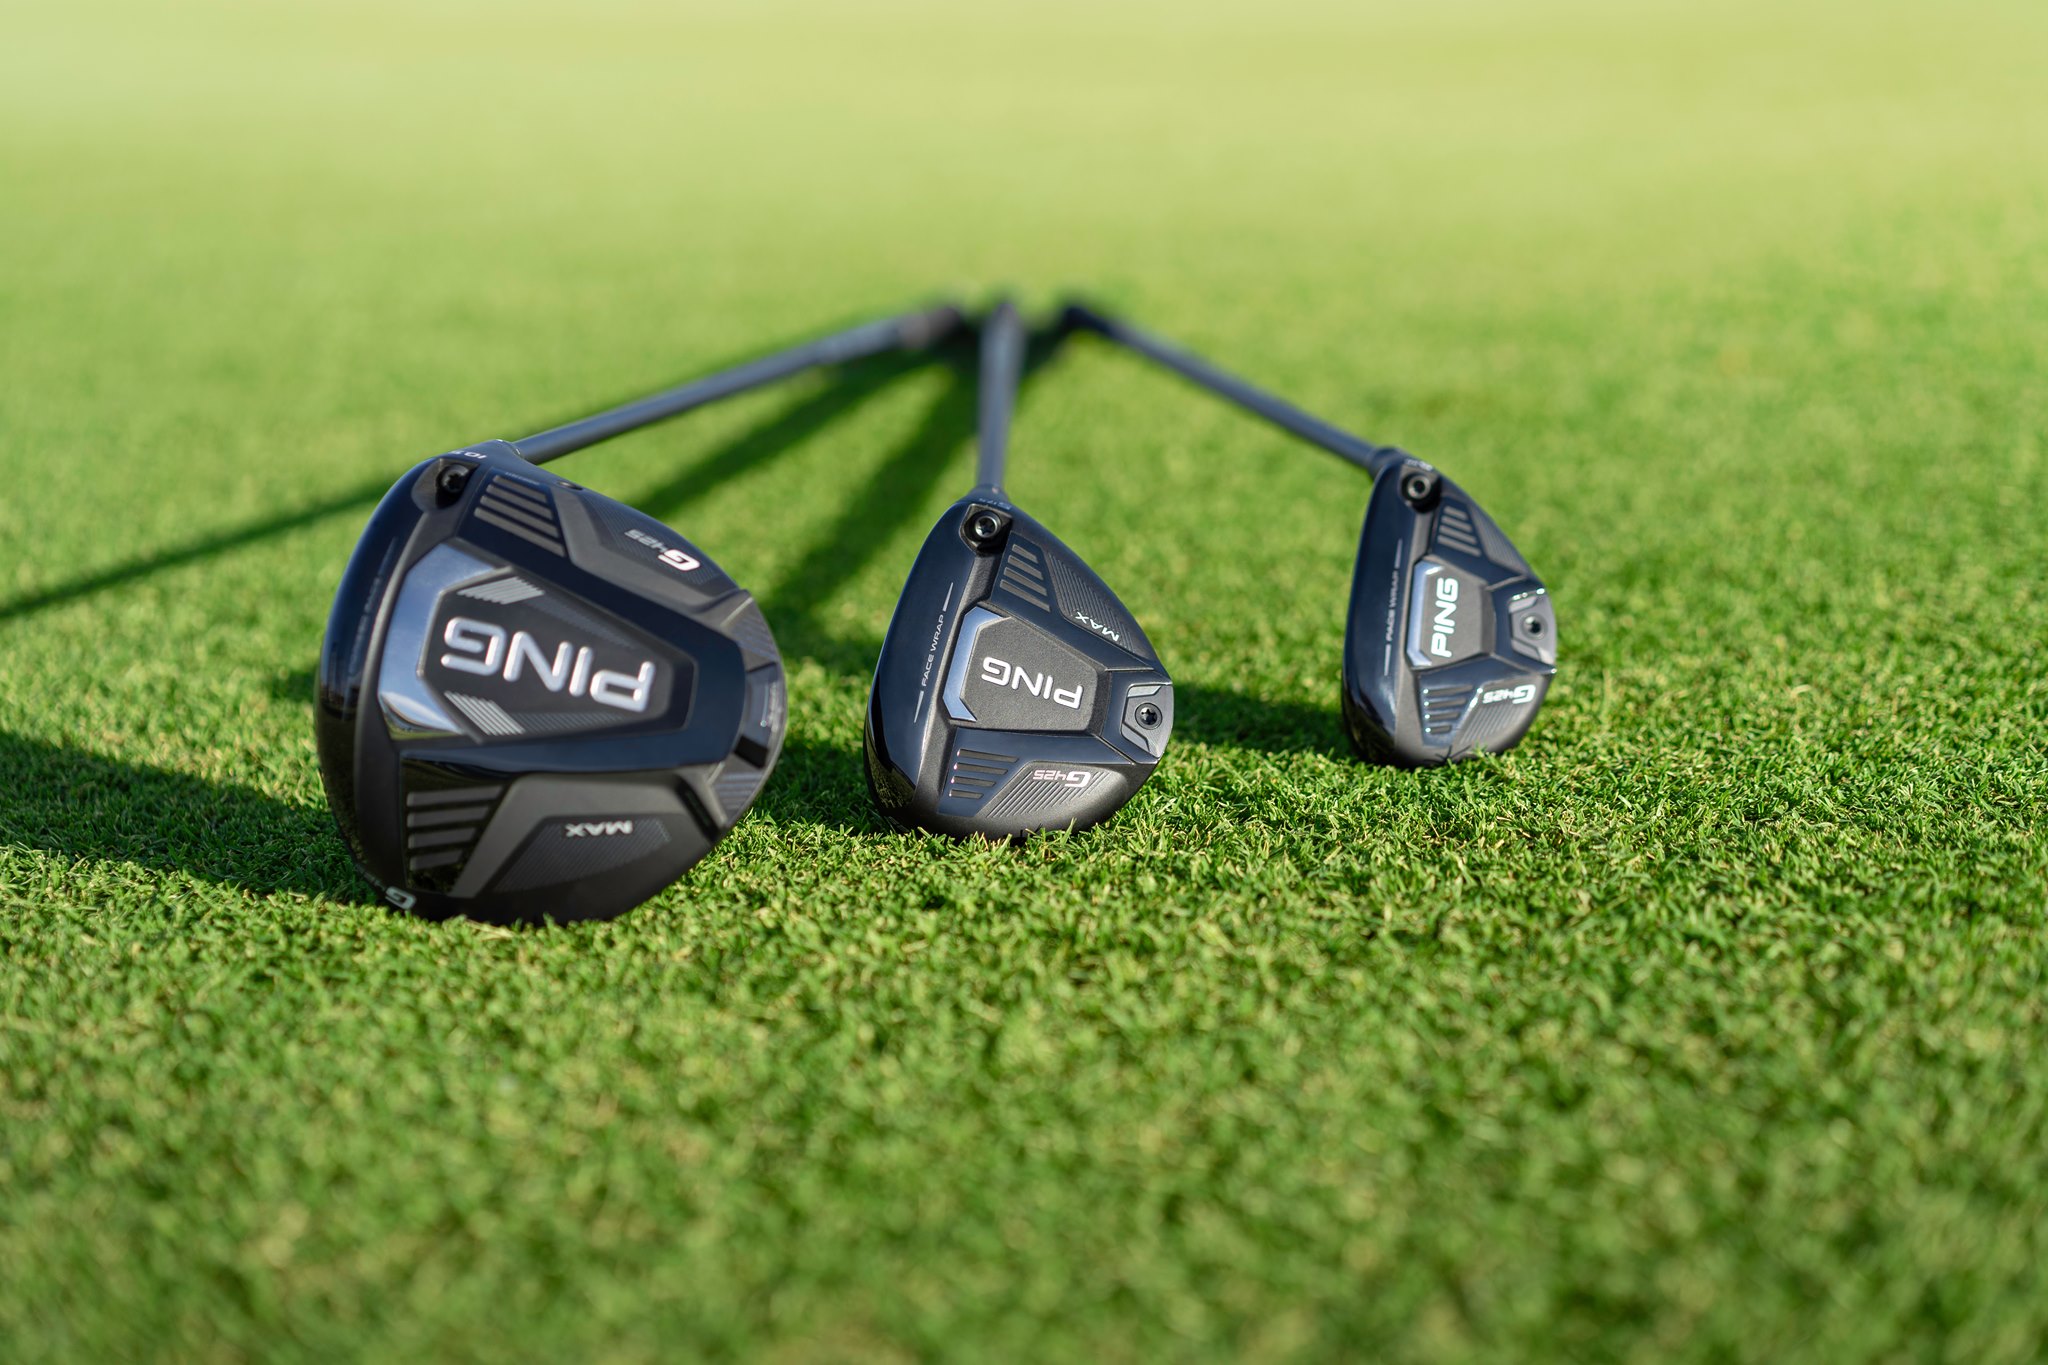 PING introduces G425 drivers, fairways, hybrids, irons and crossovers